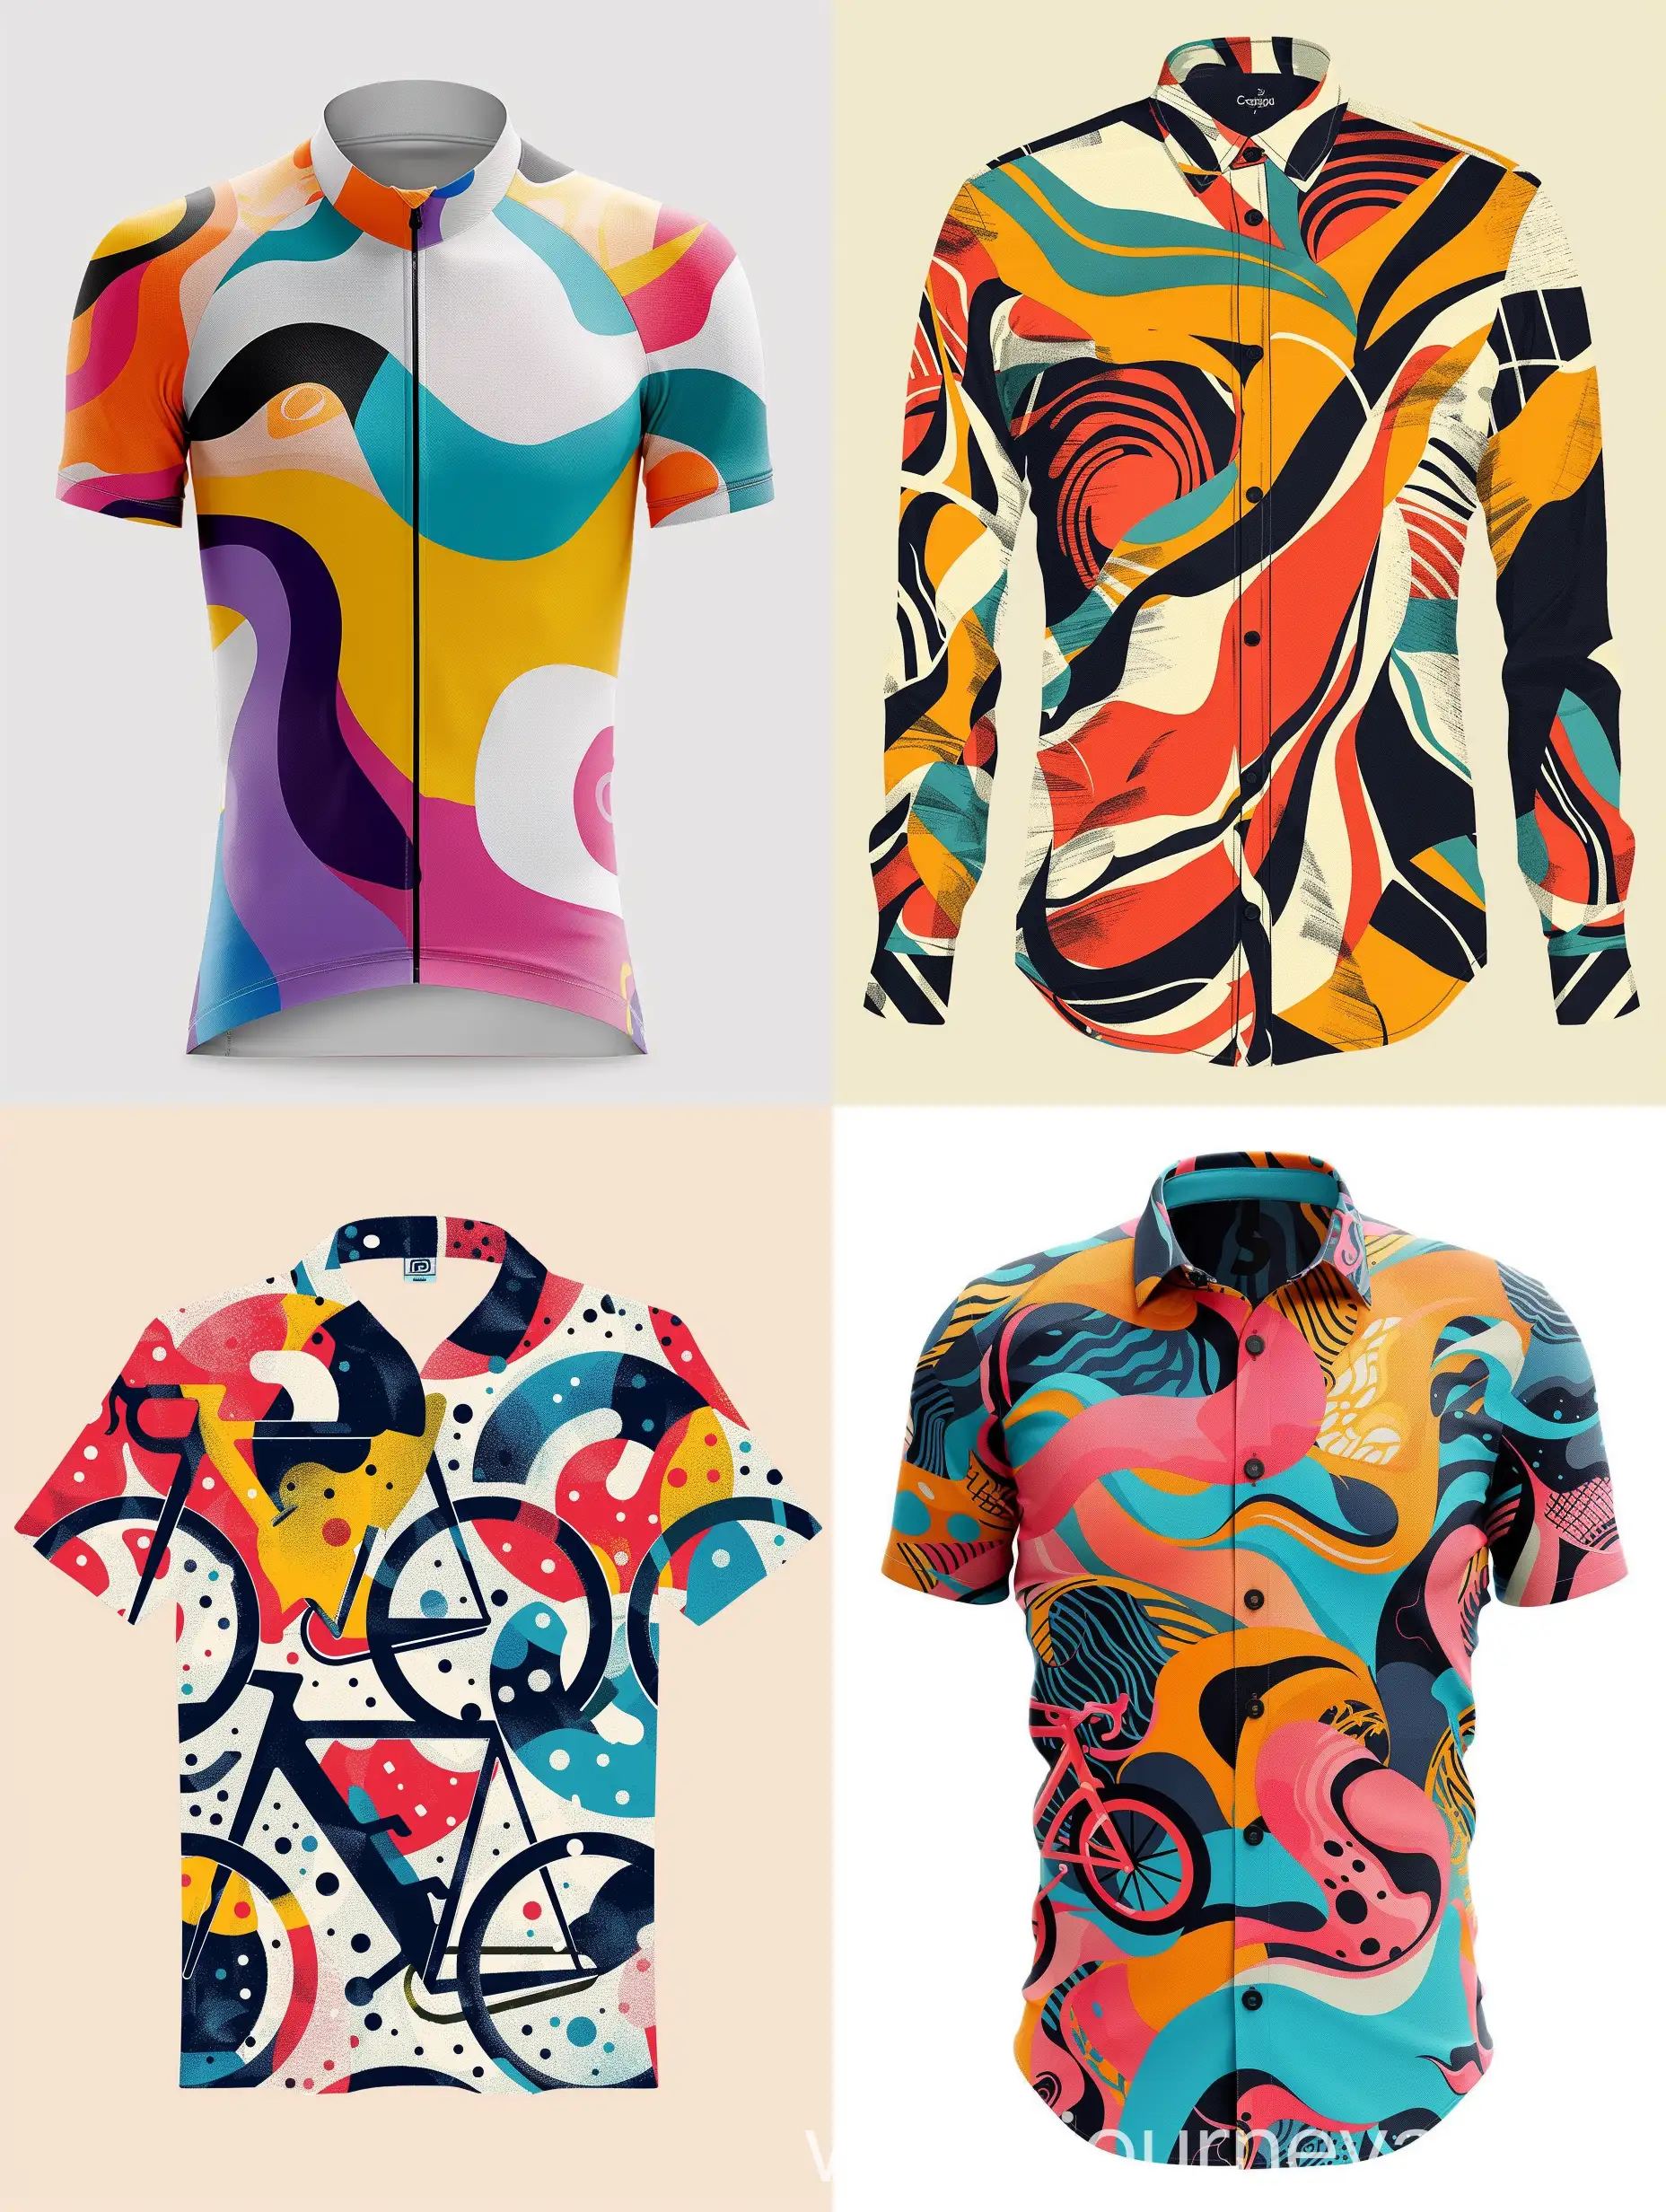 Modern cycle shirt designs, colorful and stands out, pattern design, use three colors